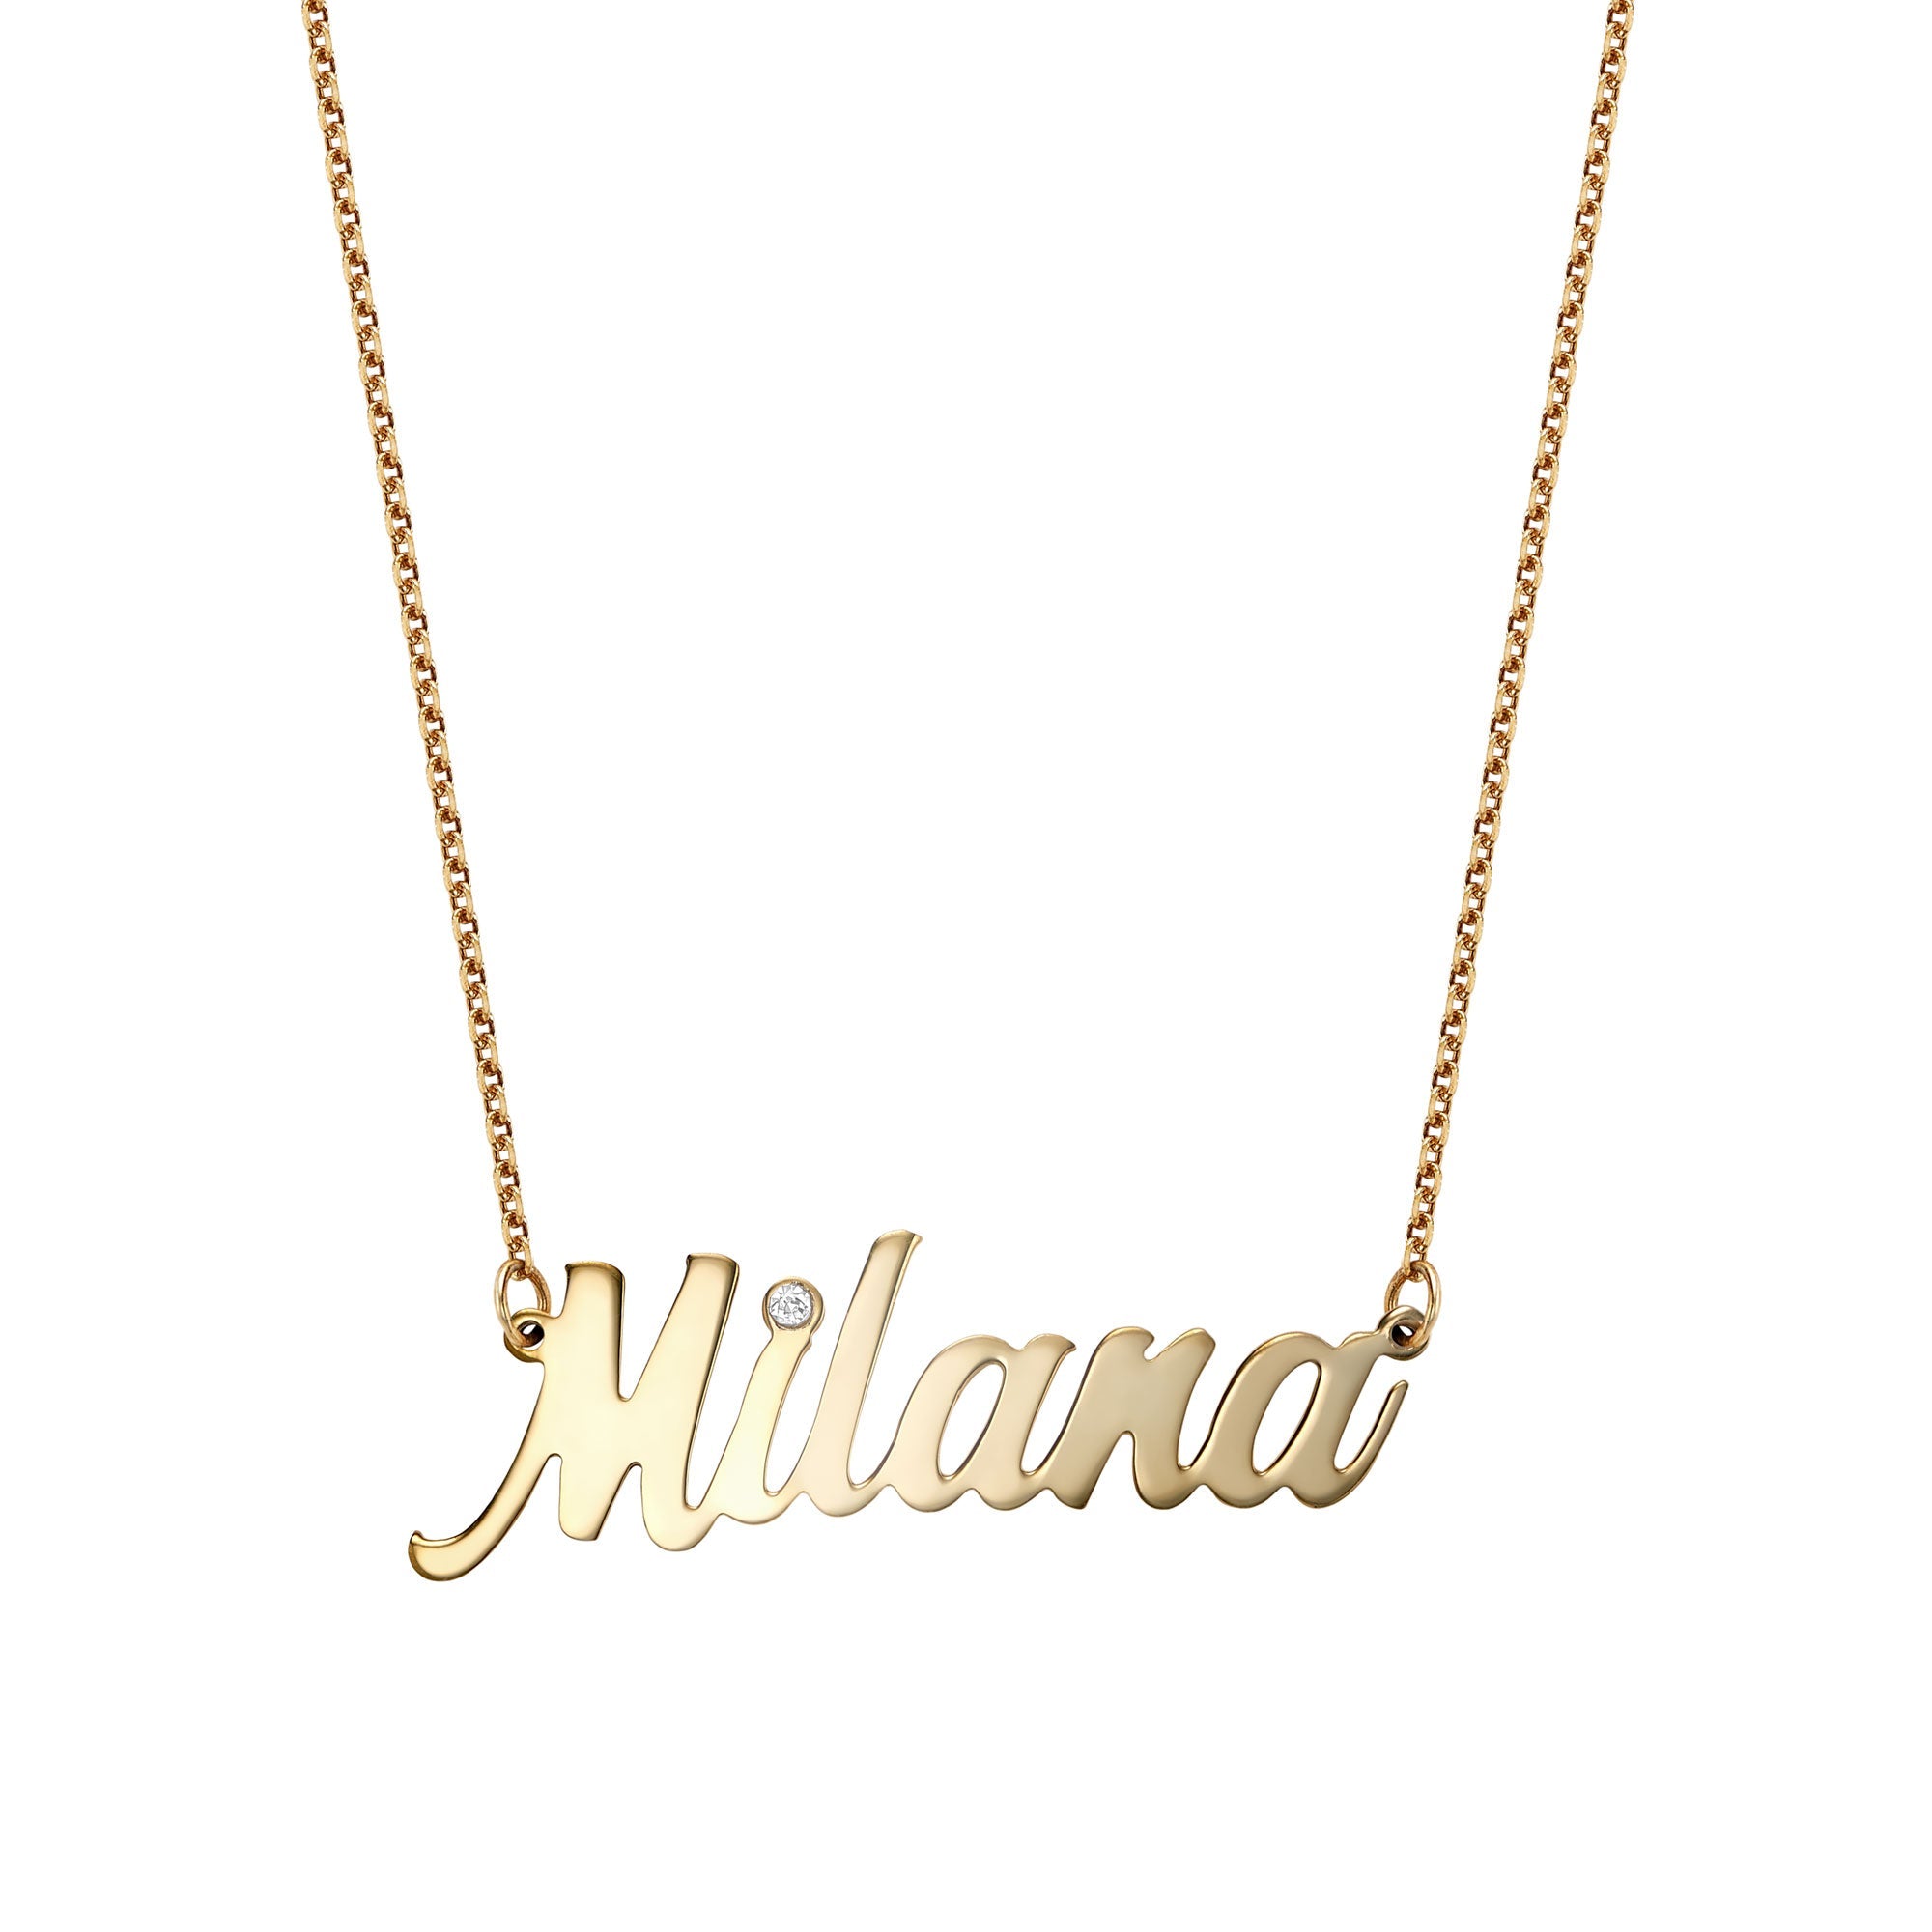 Classy Name Necklace Silver